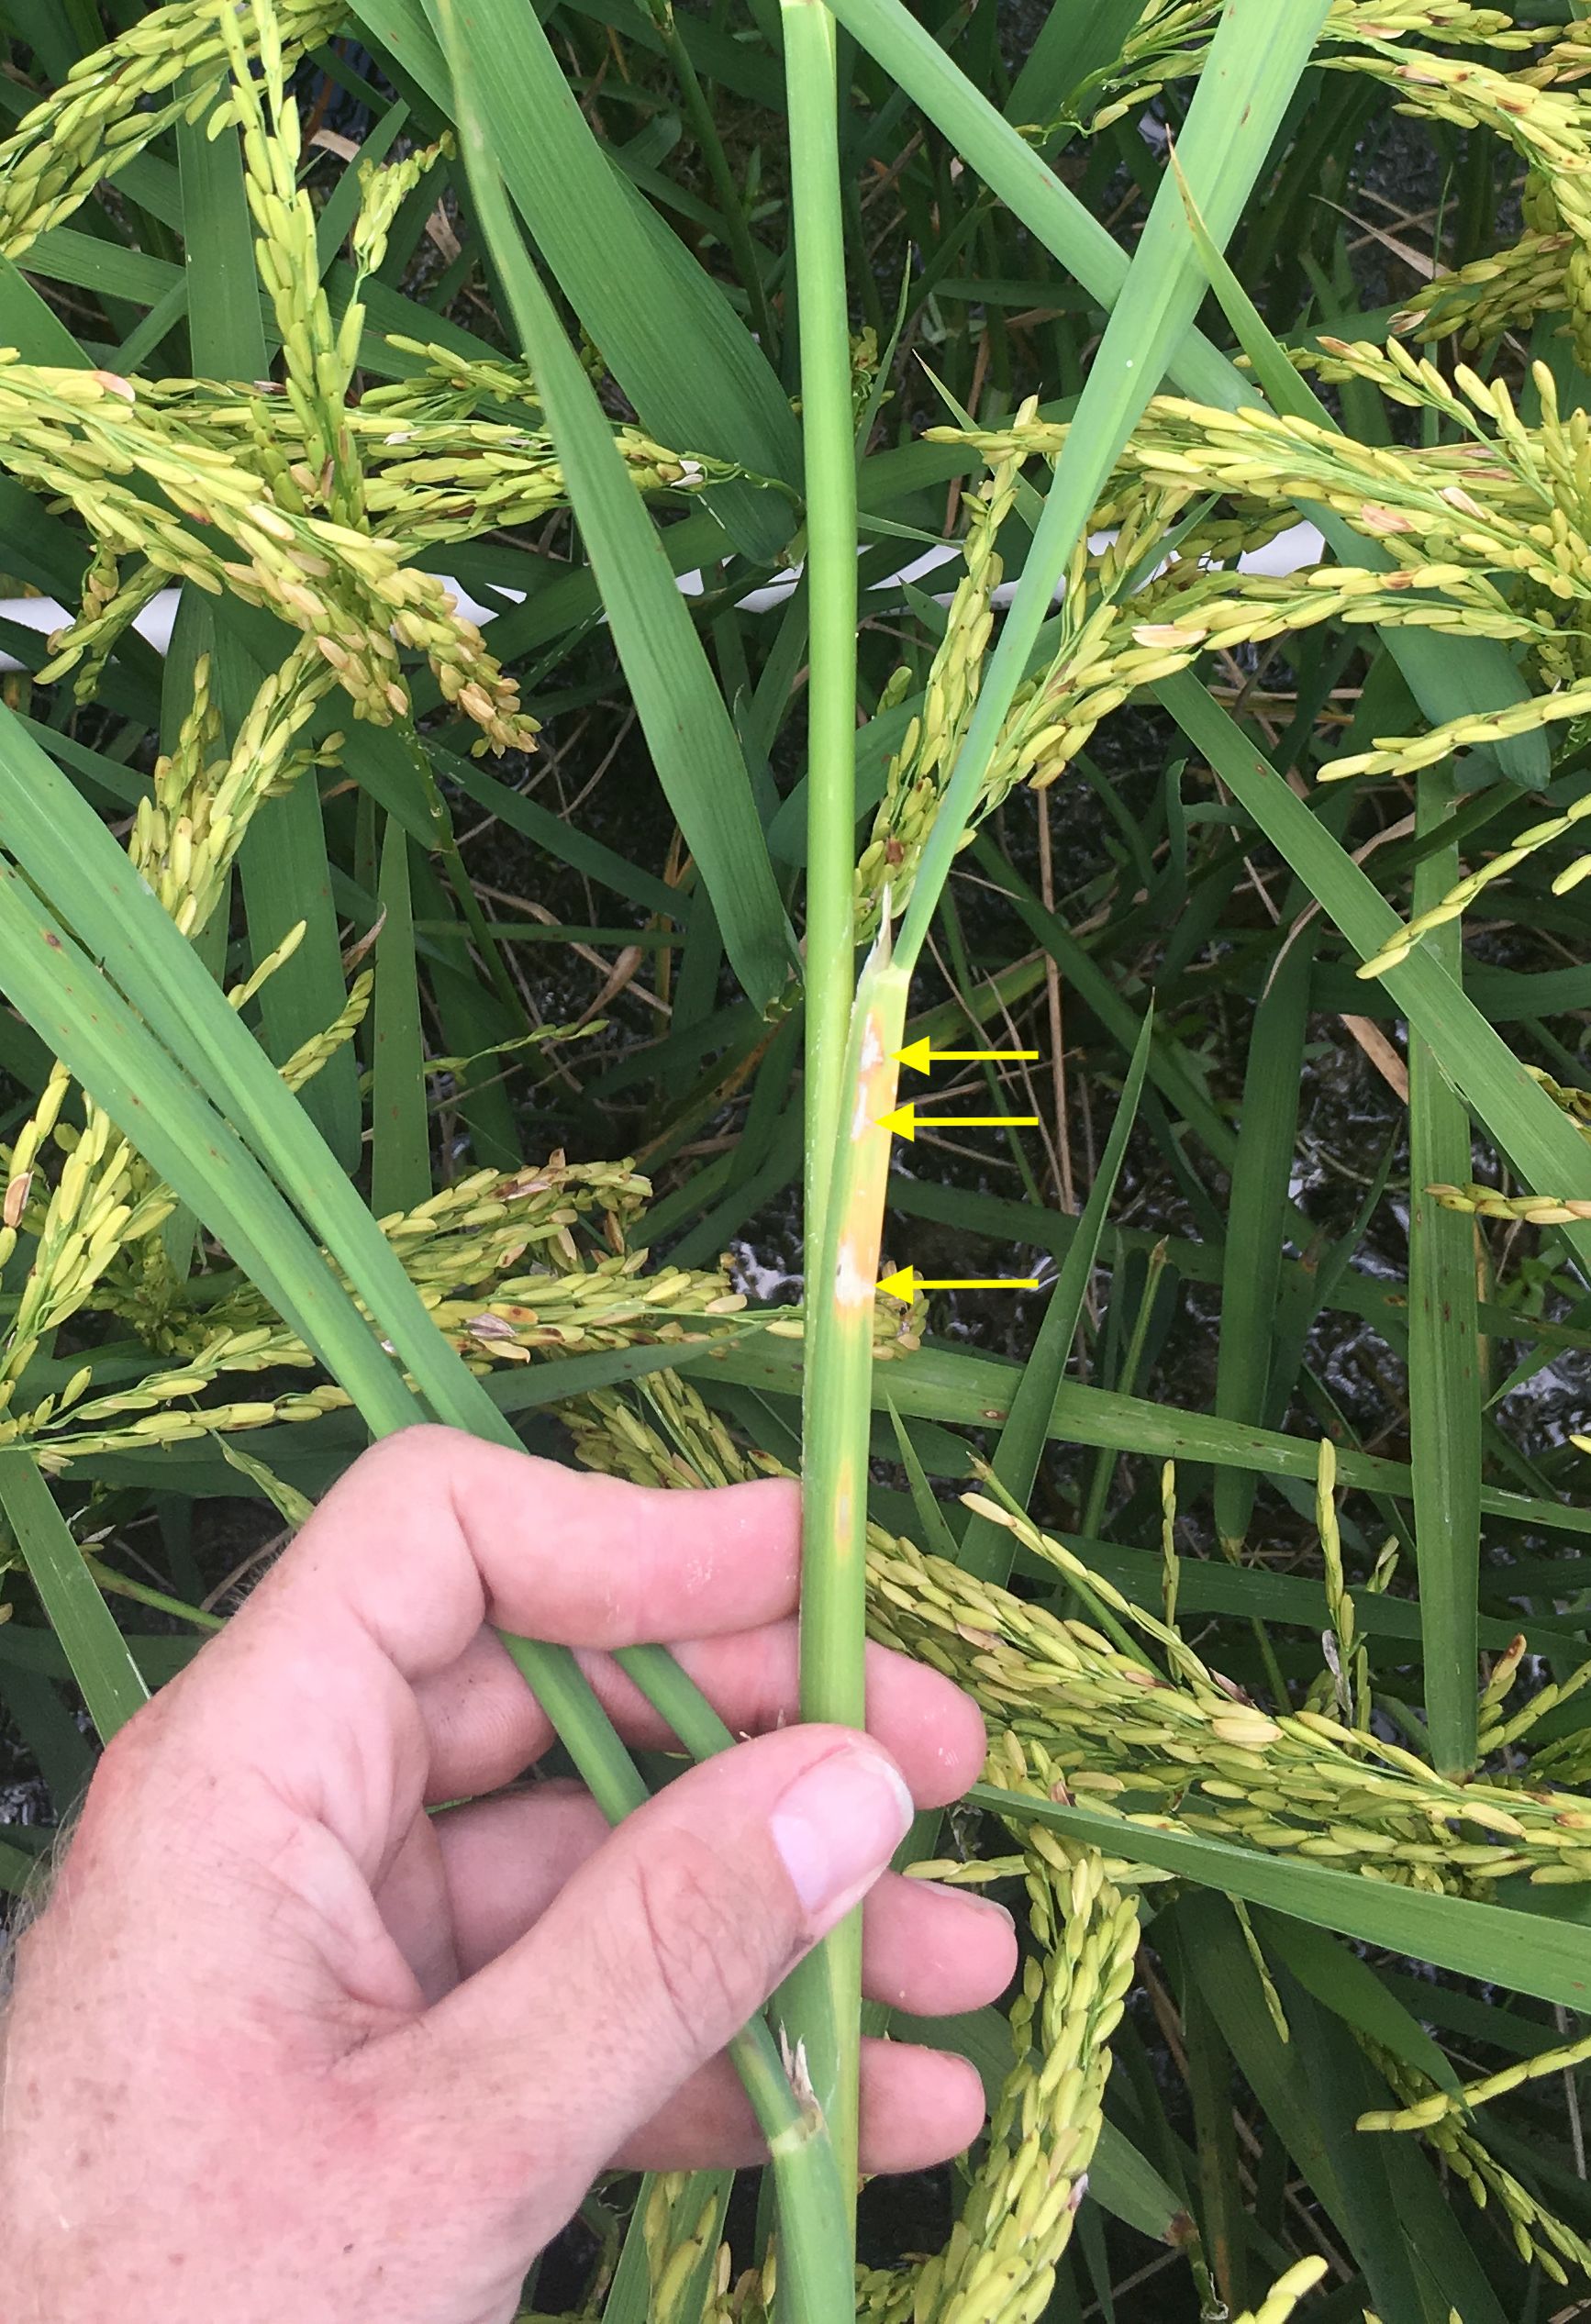 Window paning caused by young sugarcane borer larvae within rice tiller leaf sheaths. 